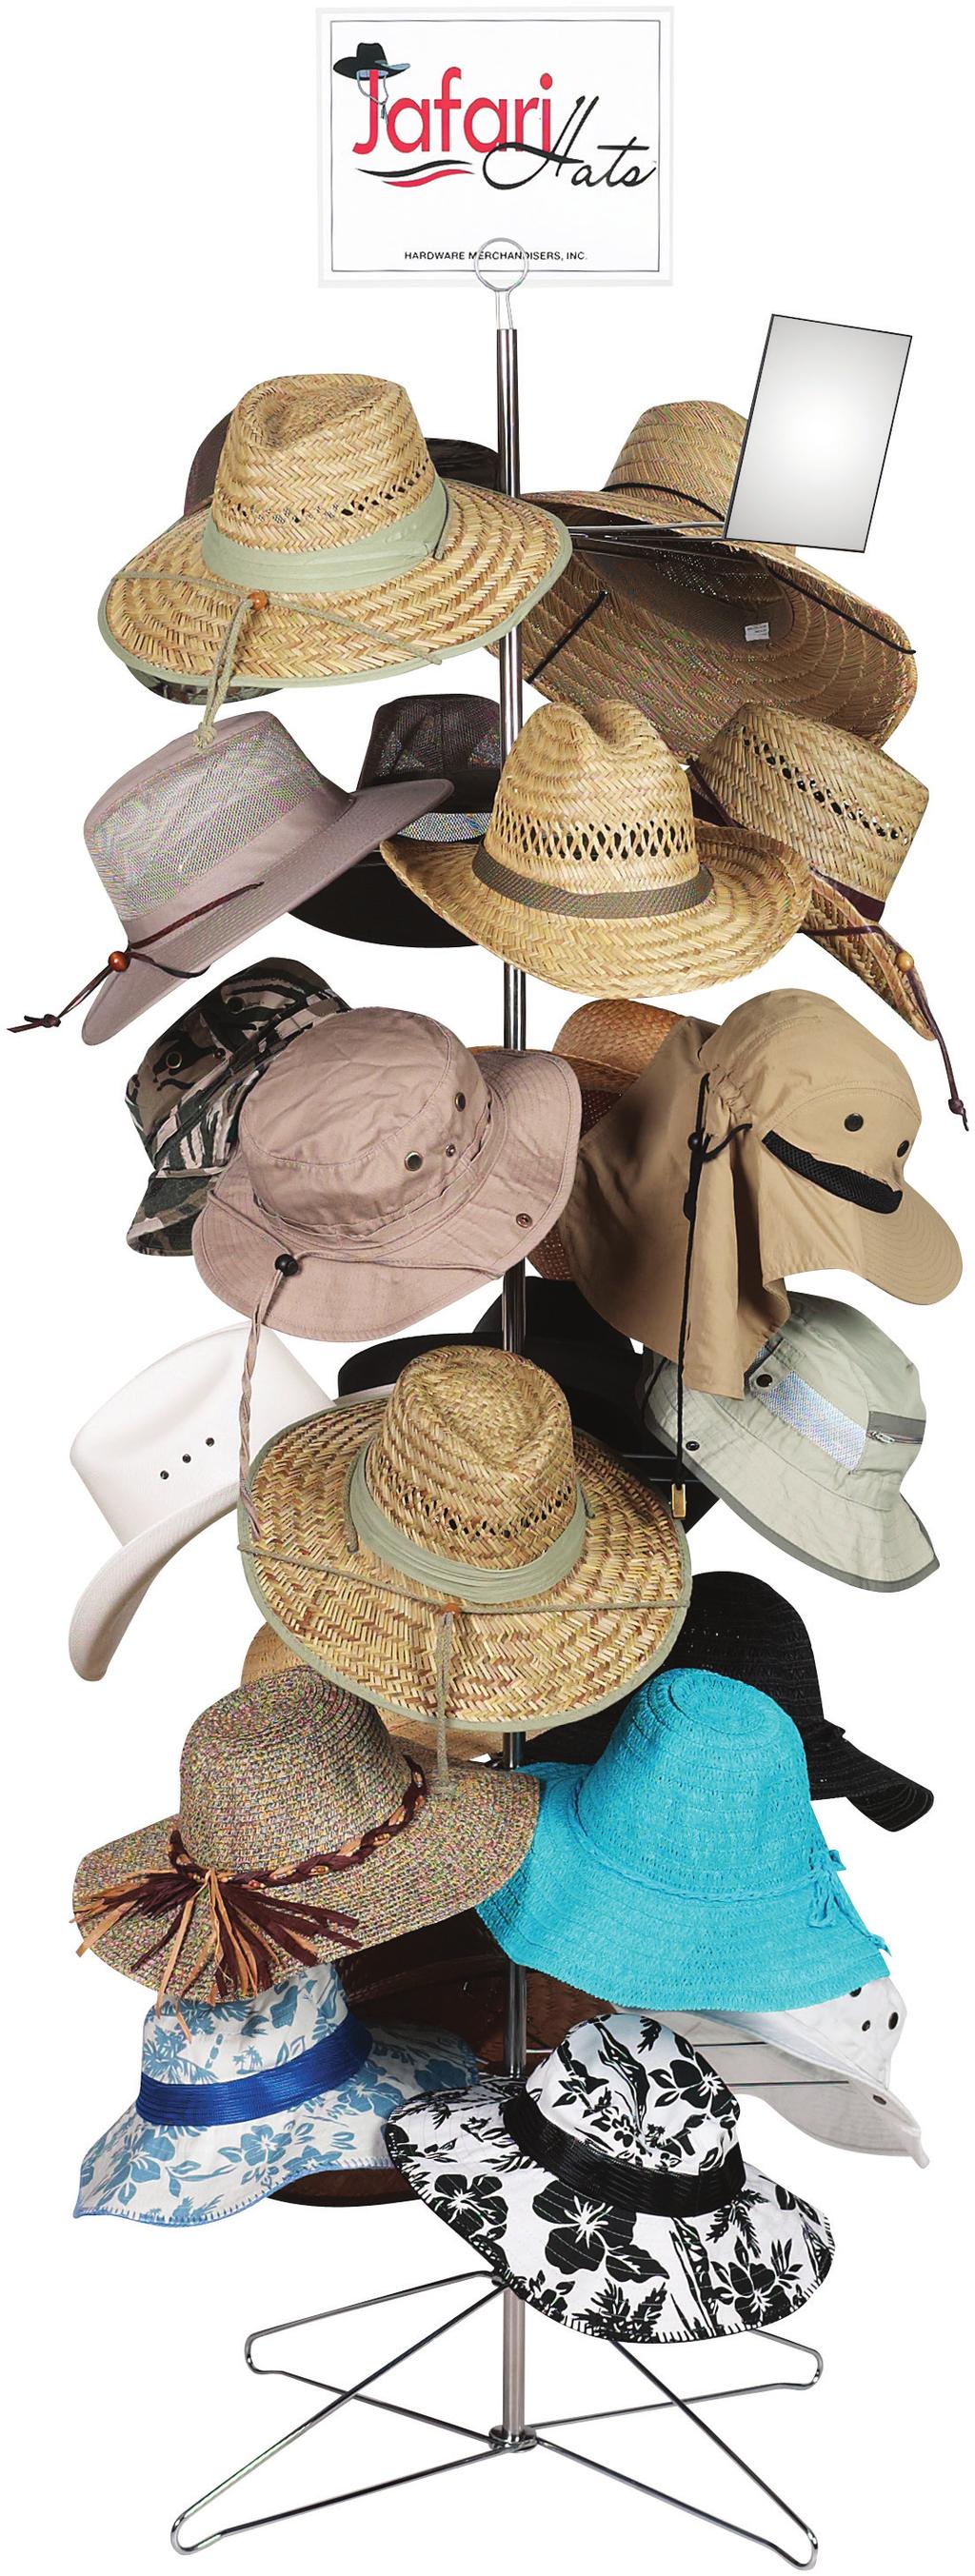 2019 We Specialize in Workmen s Hats Home of the Design The Best Selection of: 50% Profits!